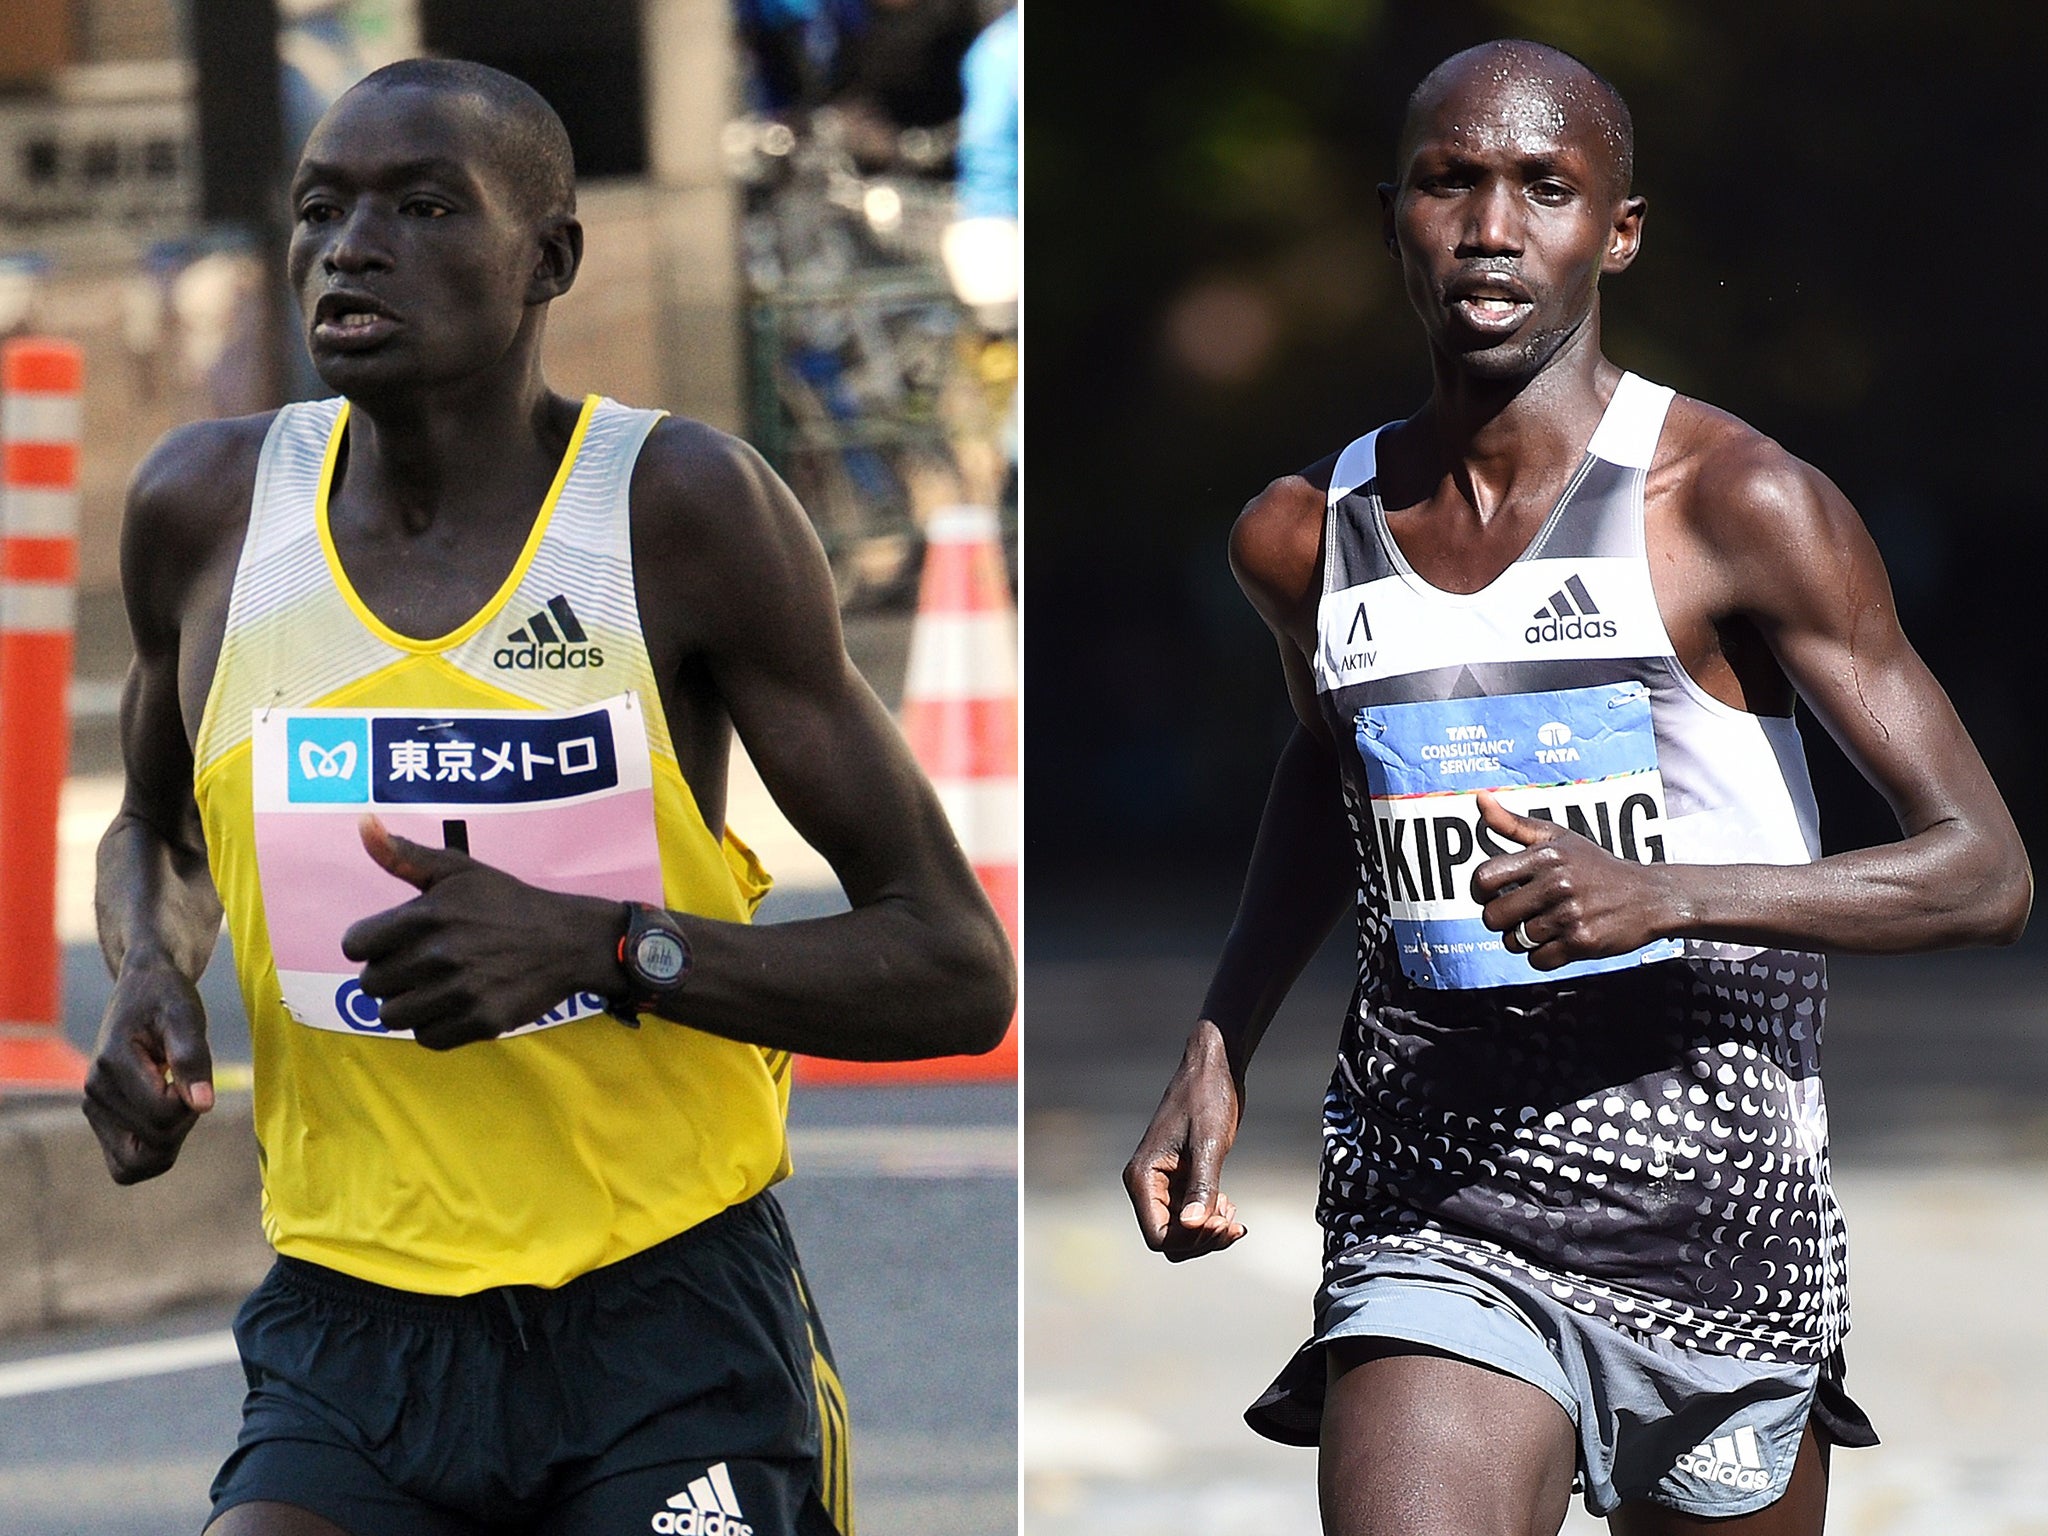 Wilson Kipsang (left) will be up against Dennis Kimetto, who took his world record